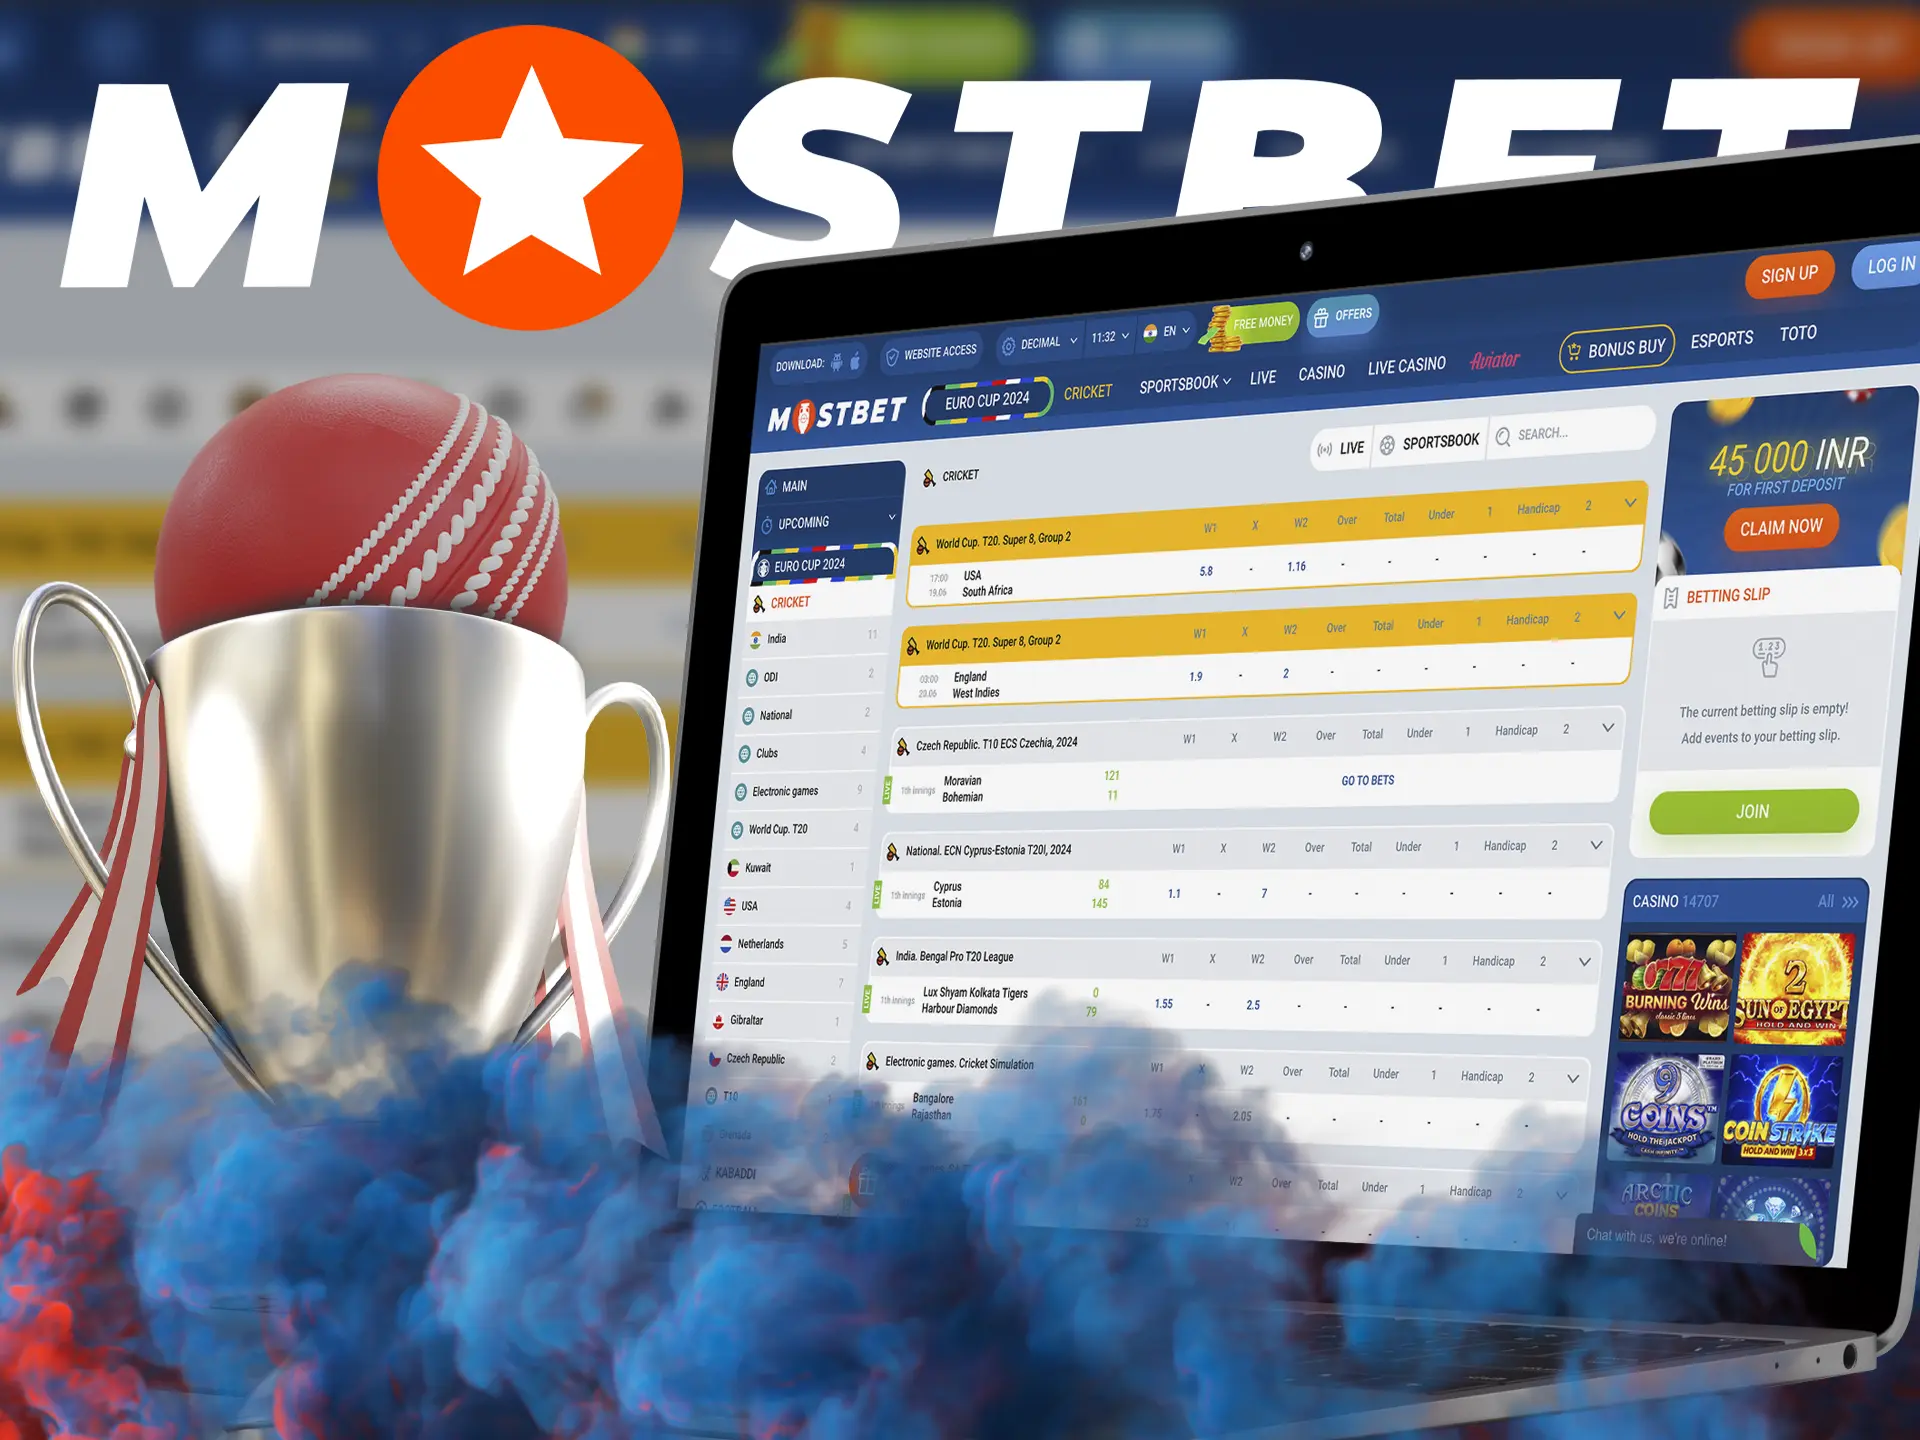 At Mostbet, you will always find the biggest cricket tournaments and can make accurate predictions on the outcome of a match.